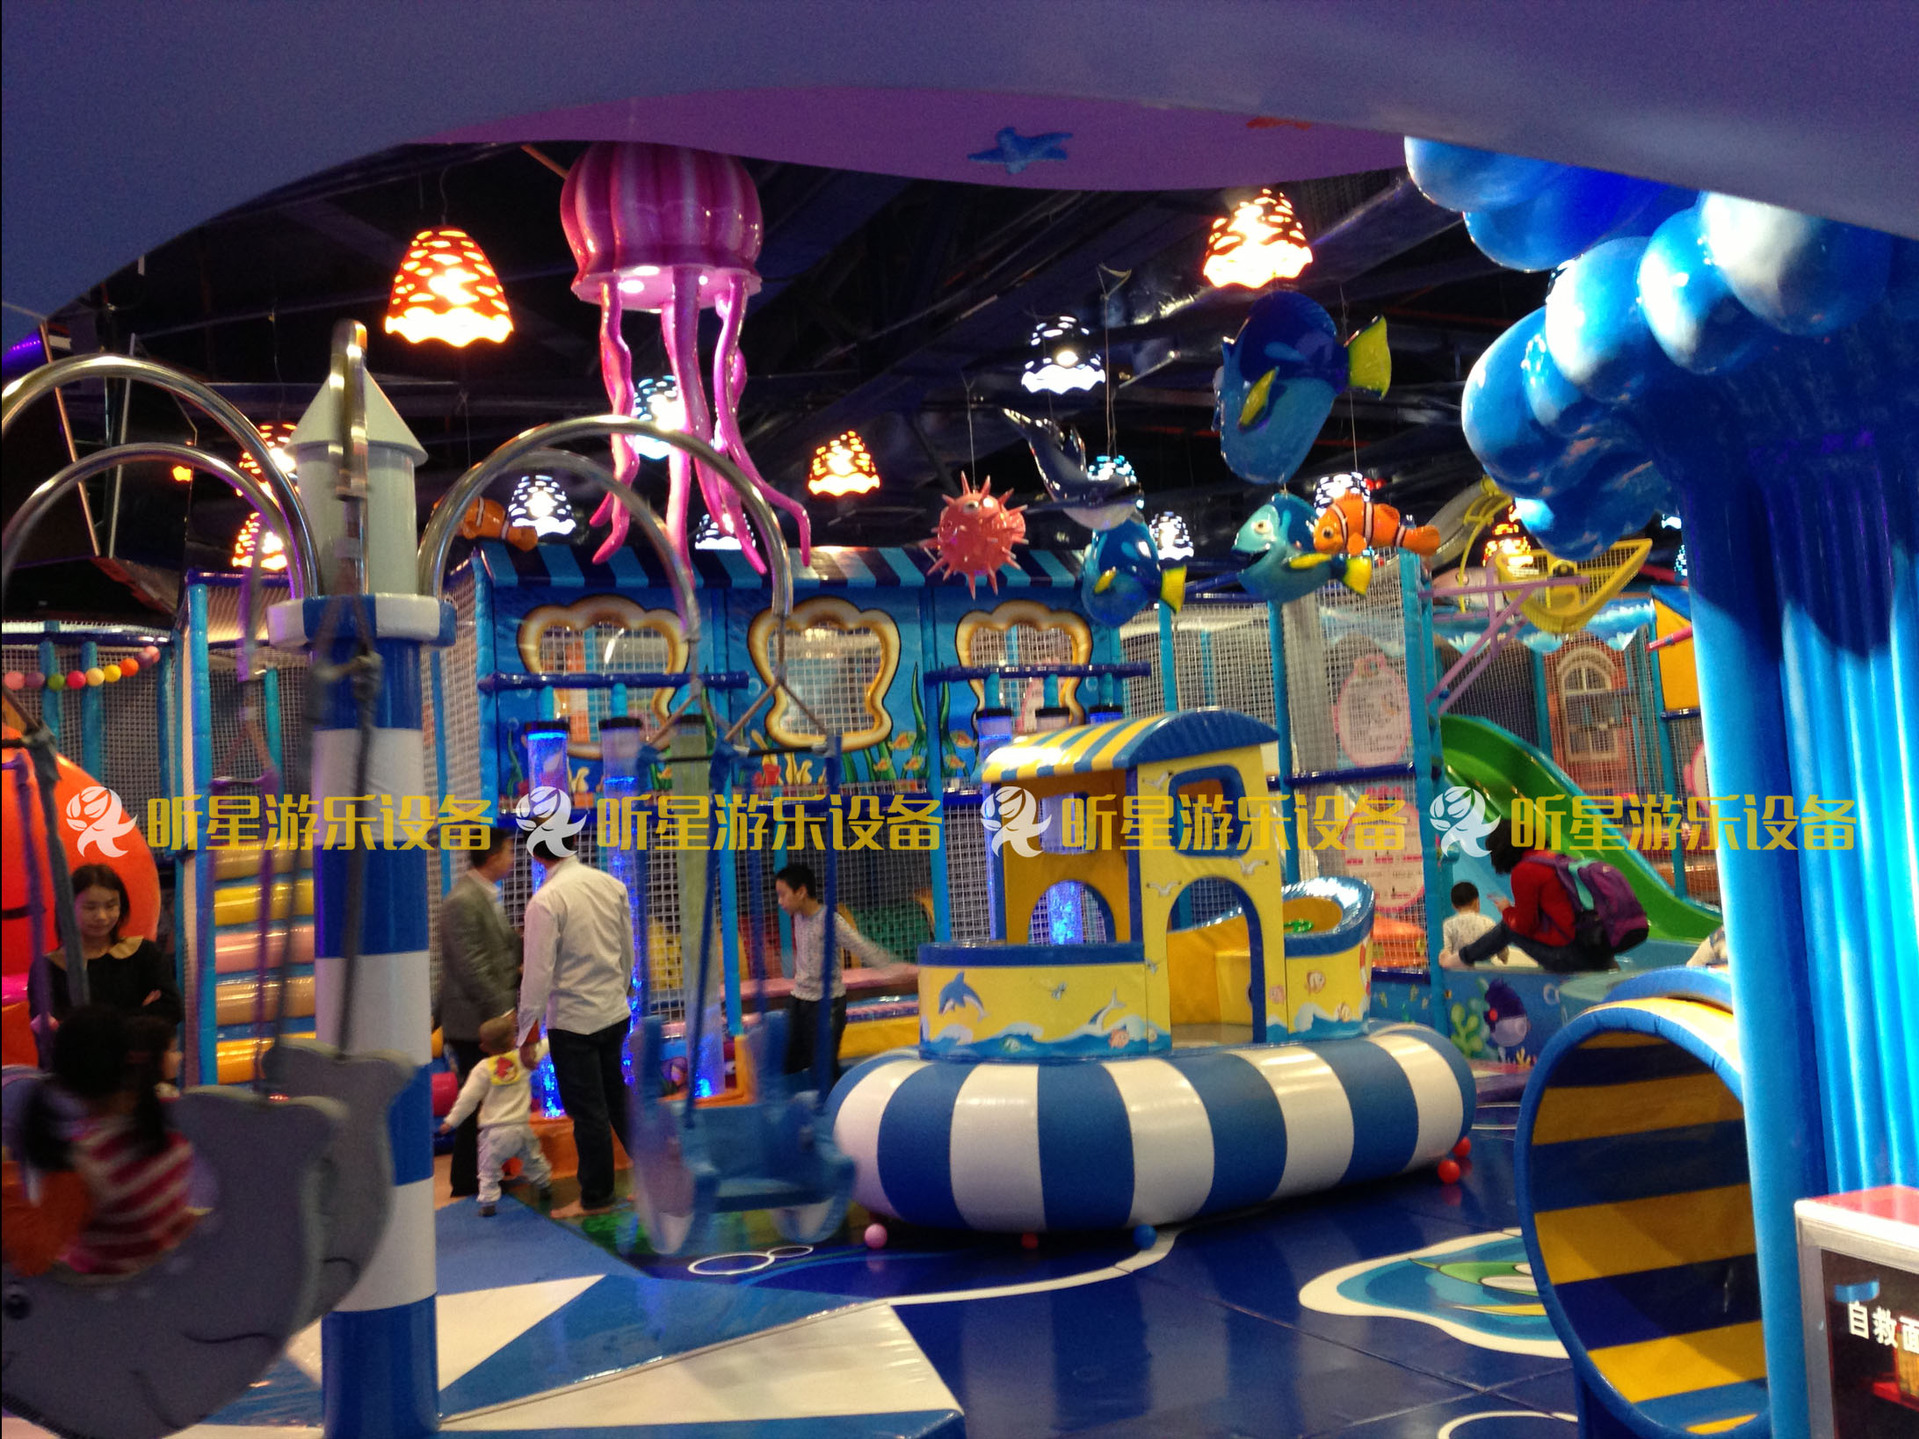 Indoor Children's Air Cushion Park_Tongling Children's Indoor Park_Indoor Small Children's Park